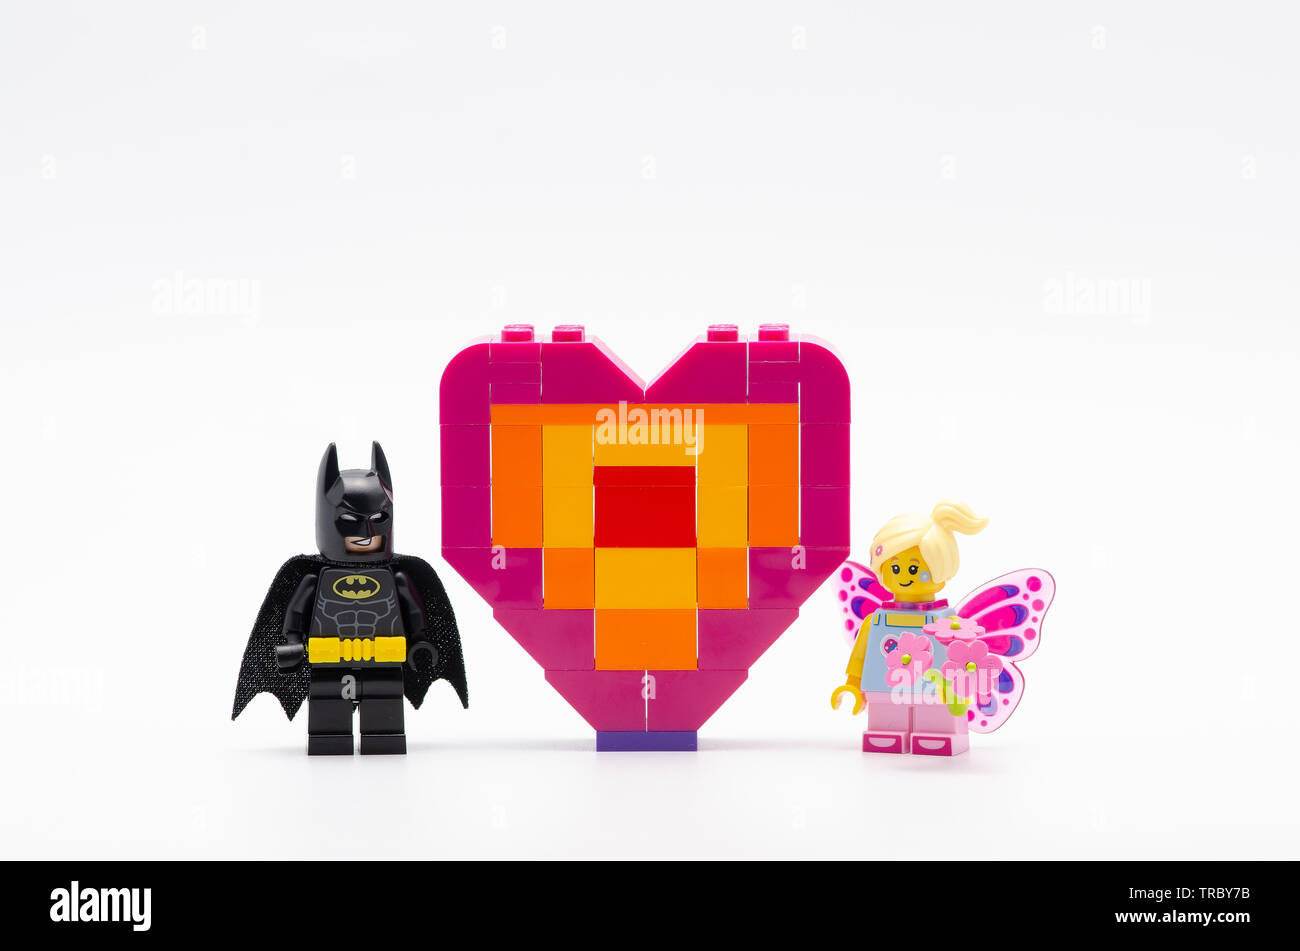 lego batman with butterfly girl and piece offering heart shape.  Lego minifigures are manufactured by The Lego. Stock Photo